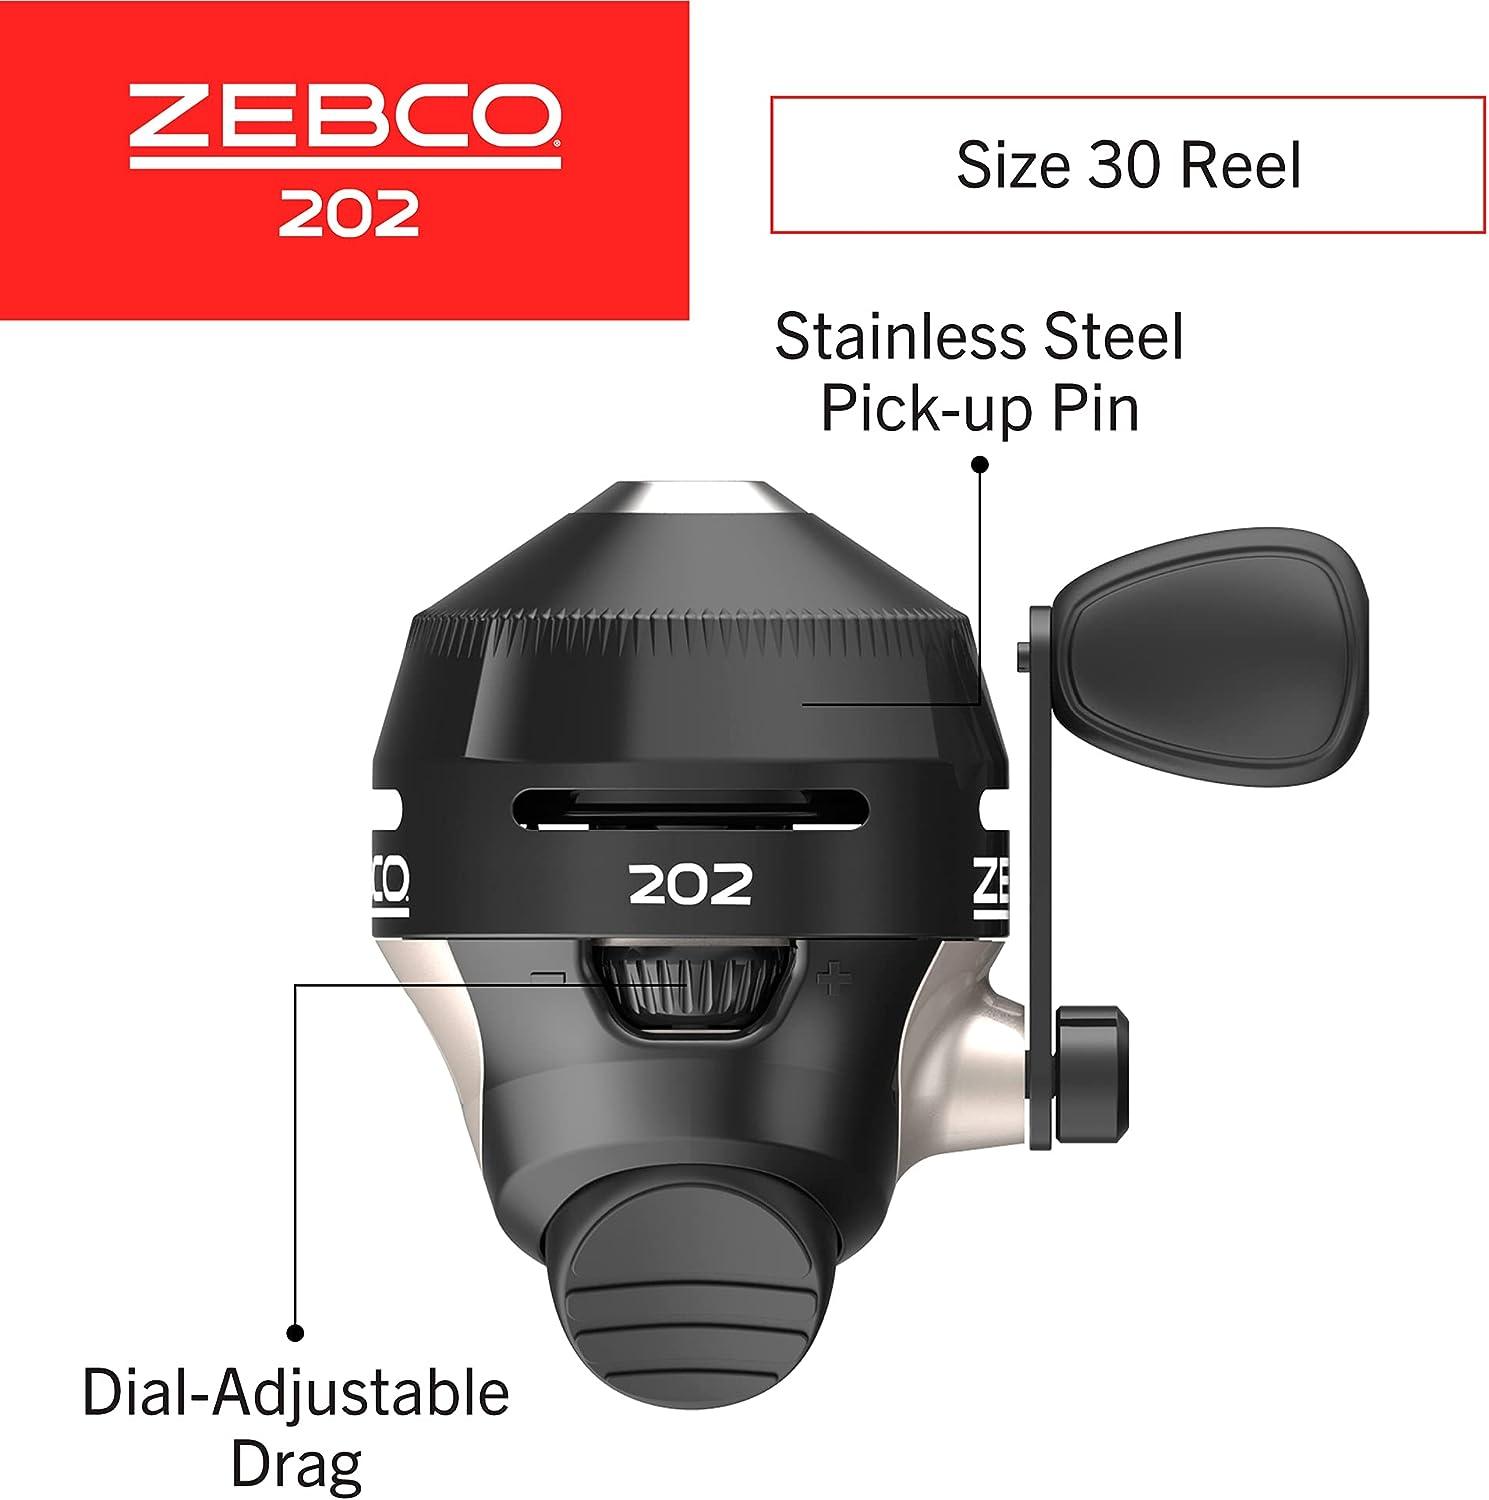 Zebco 202 Spincast Fishing Reel, Size 30 Reel, Right-Hand Retrieve, Durable  All-Metal Gears, Stainless Steel Pick-up Pin, Pre-Spooled with 10-Pound  Zebco Fishing Line, Black, Clam Packaging